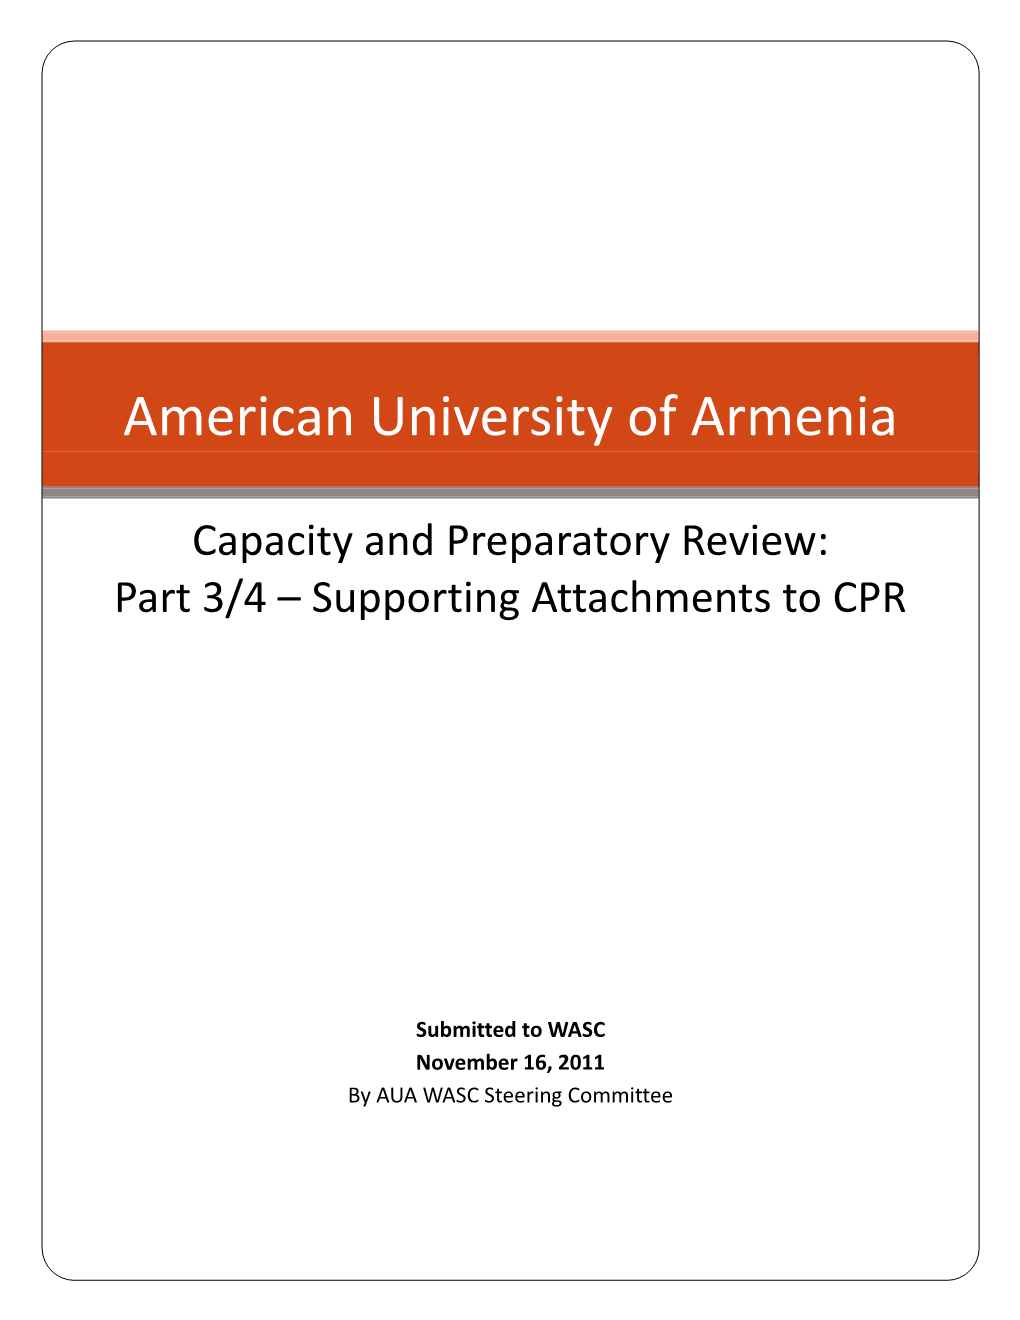 Capacity and Preparatory Review: Part 3/4 – Supporting Attachments to CPR